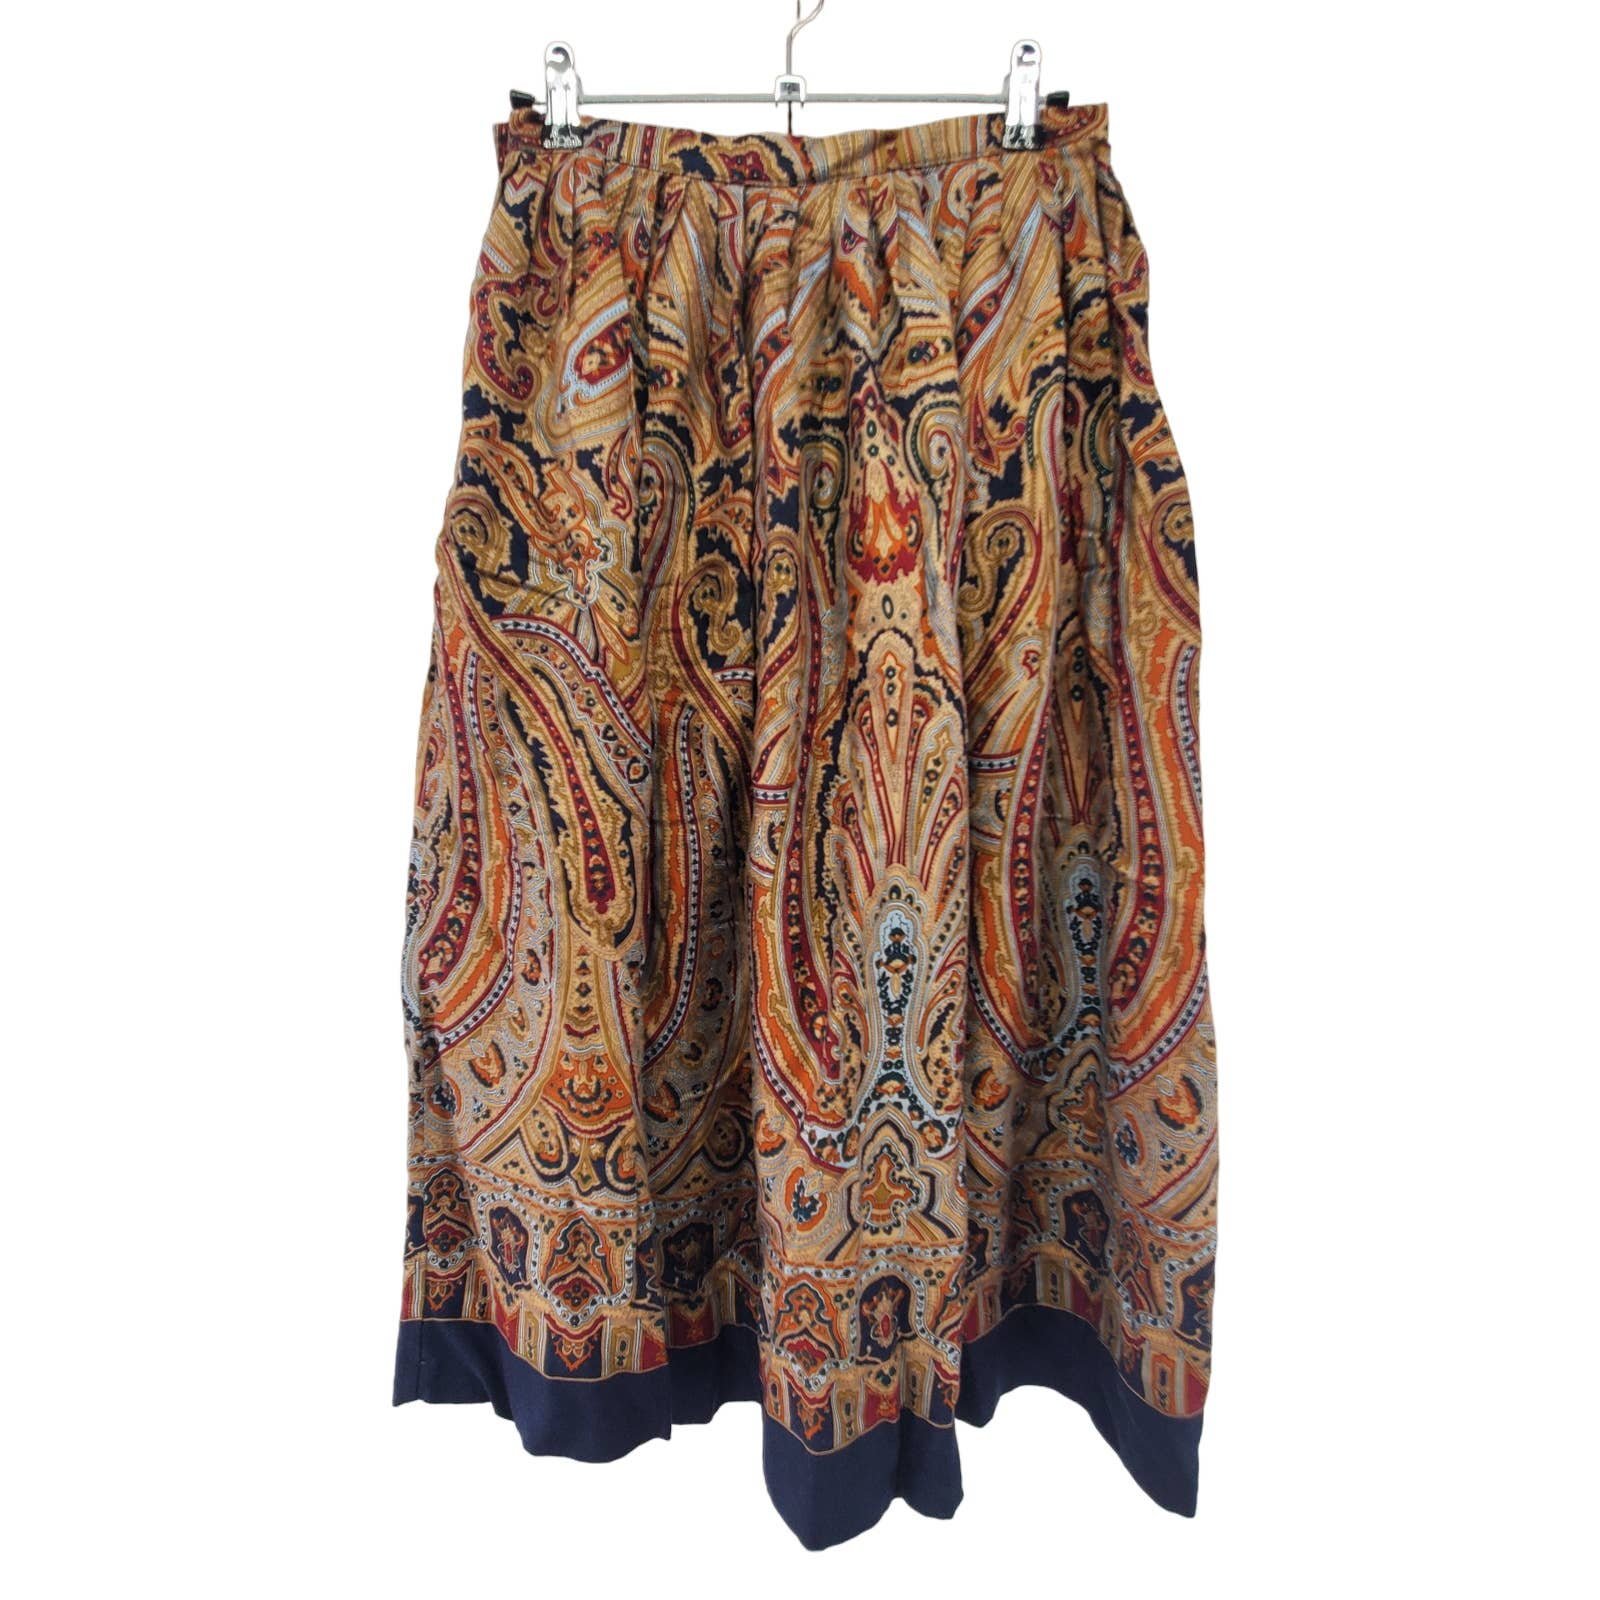 Fashion Vintage Fachatta Sz 10 Paisley Pleated A-line Knee Length Skirt With Pockets Nu1bzvMIC Low Price